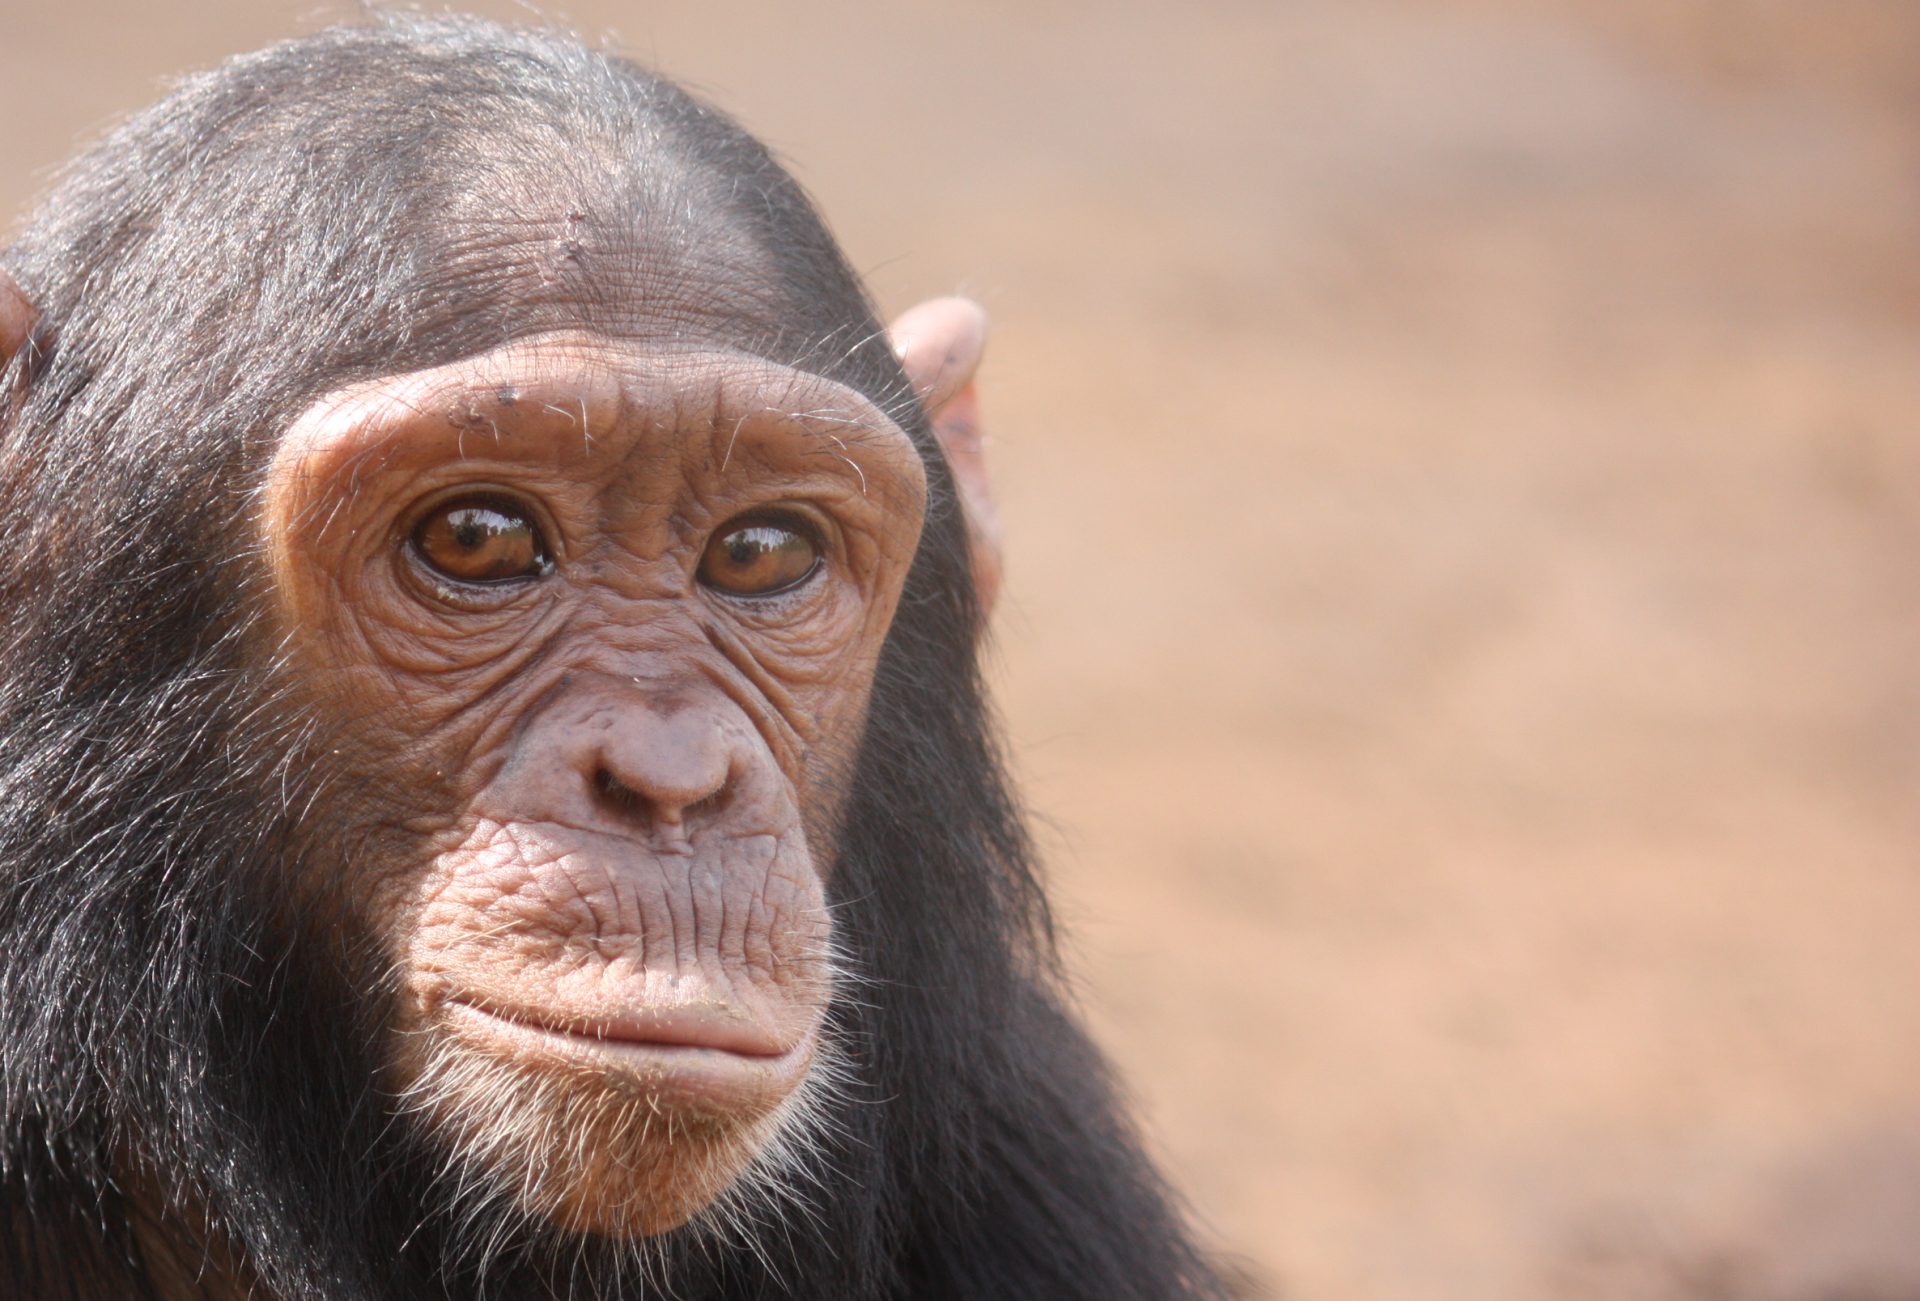 GIVING DAY FOR APES – DOGUY, a vulnerable chimpanzee